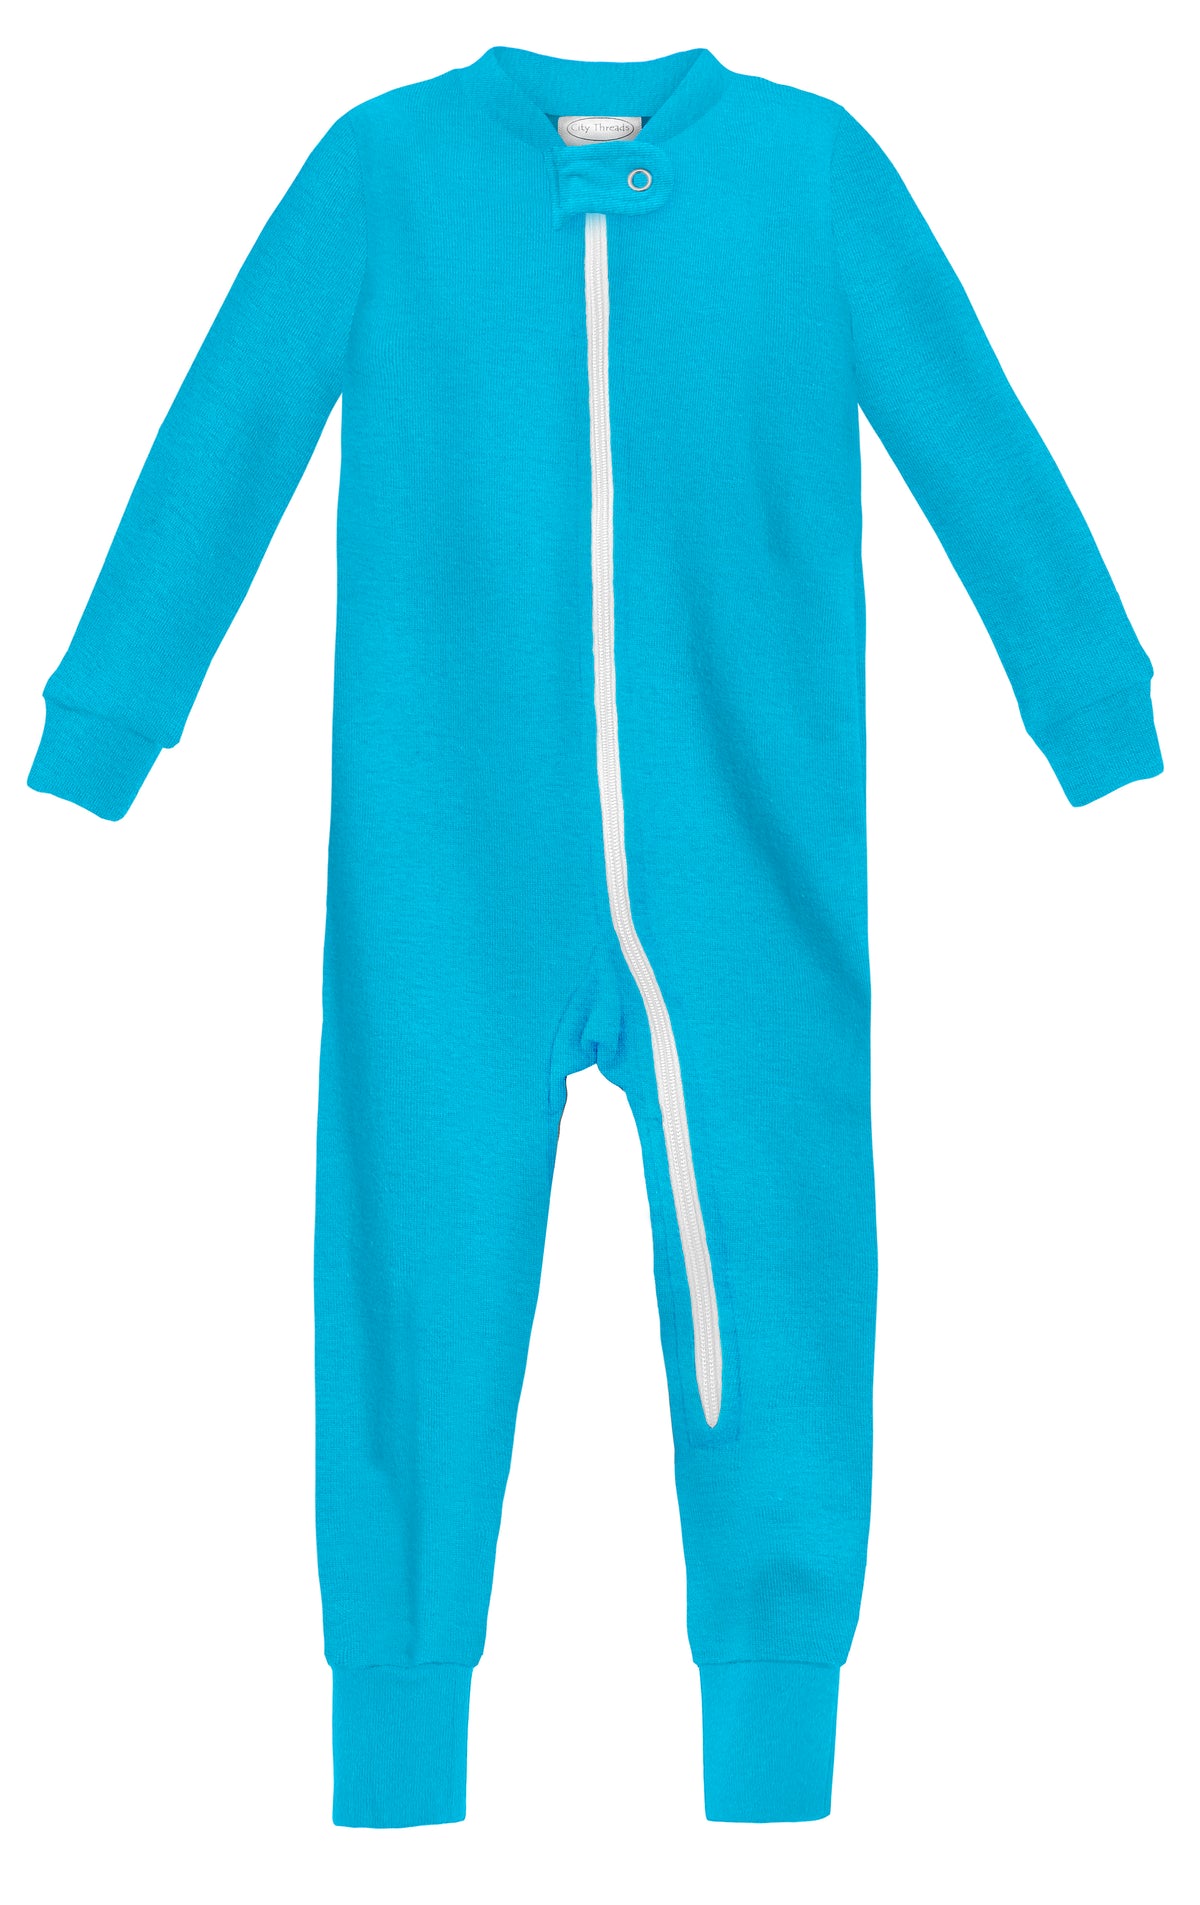 Super-Soft Organic Cotton Footless Zip Footie| Turquoise